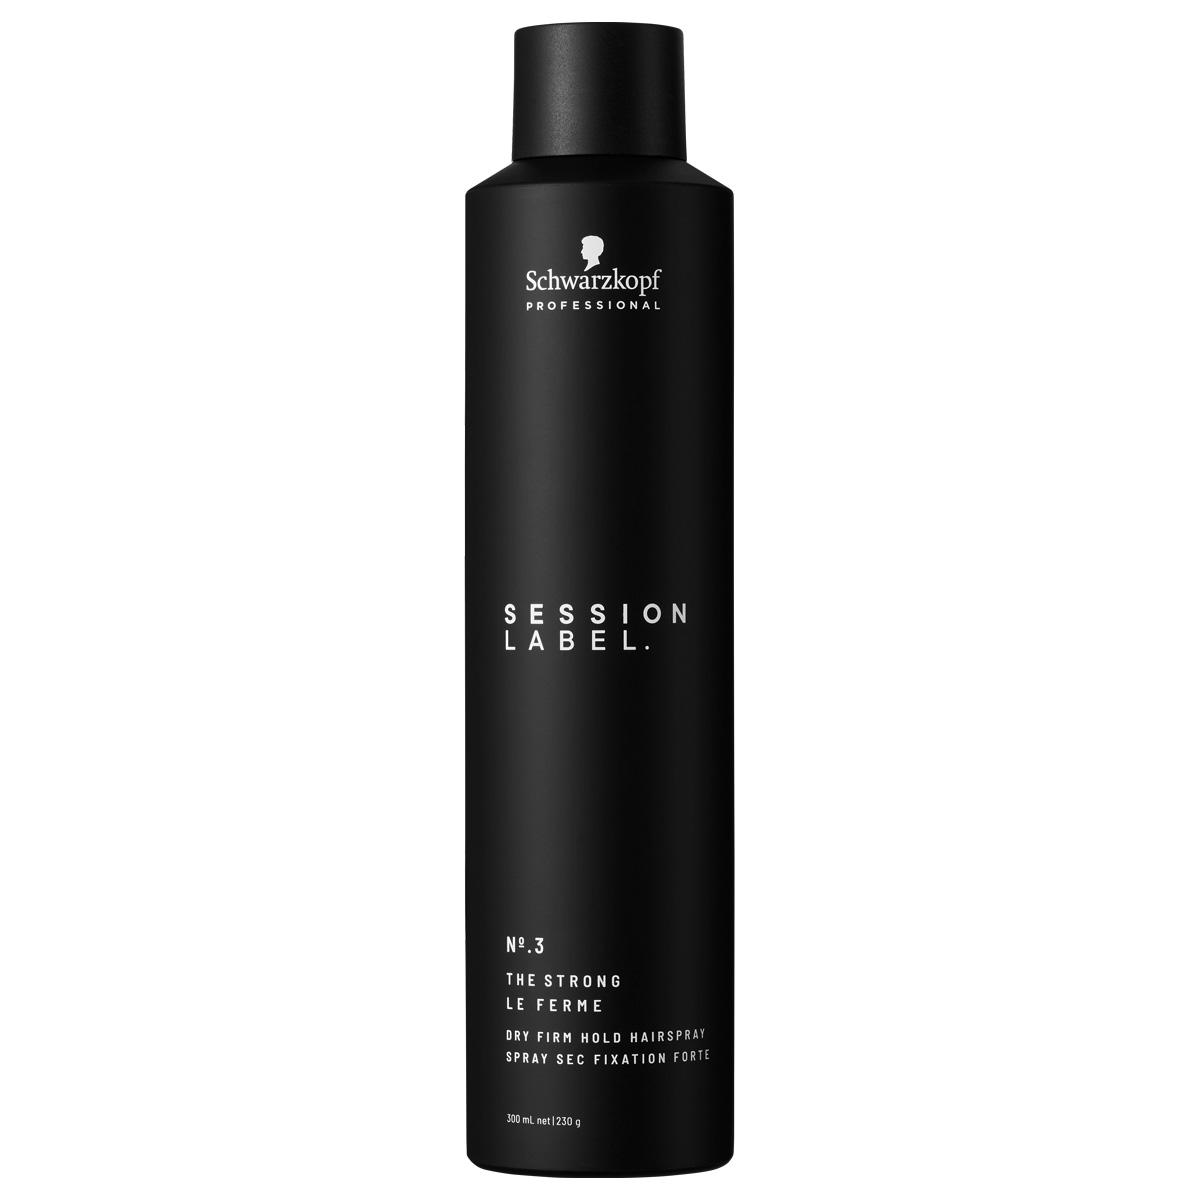 Schwarzkopf Professional Session Label The Strong 300 ml